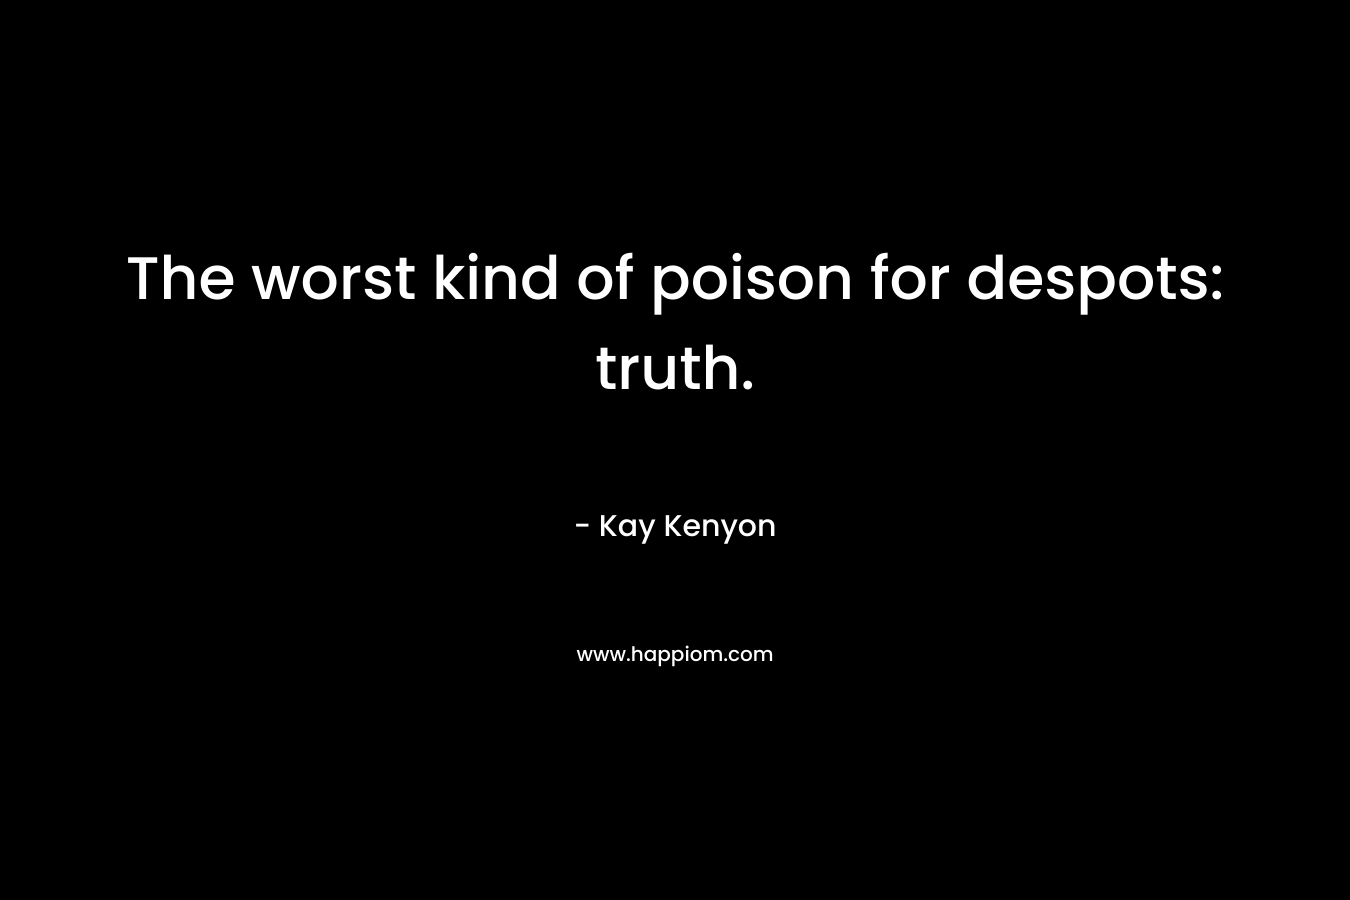 The worst kind of poison for despots: truth. – Kay Kenyon